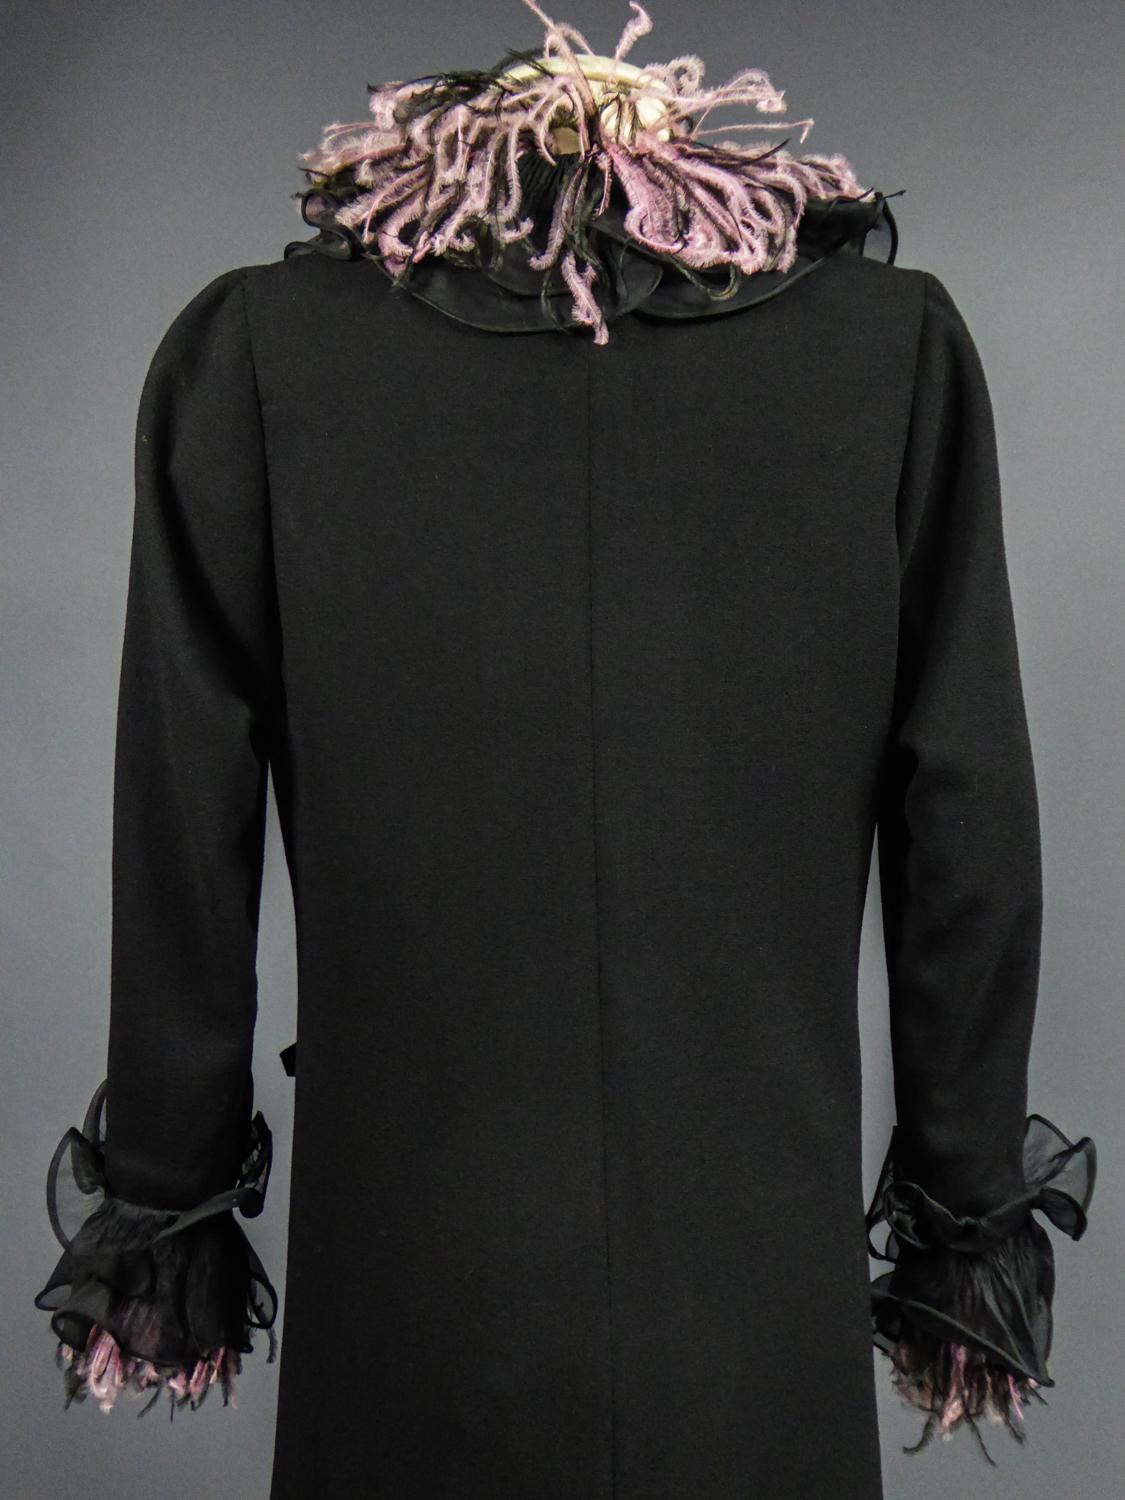 An Yves Saint Laurent Haute Couture Coat Dress Numbered 29390 Circa 1970/1980 For Sale 5